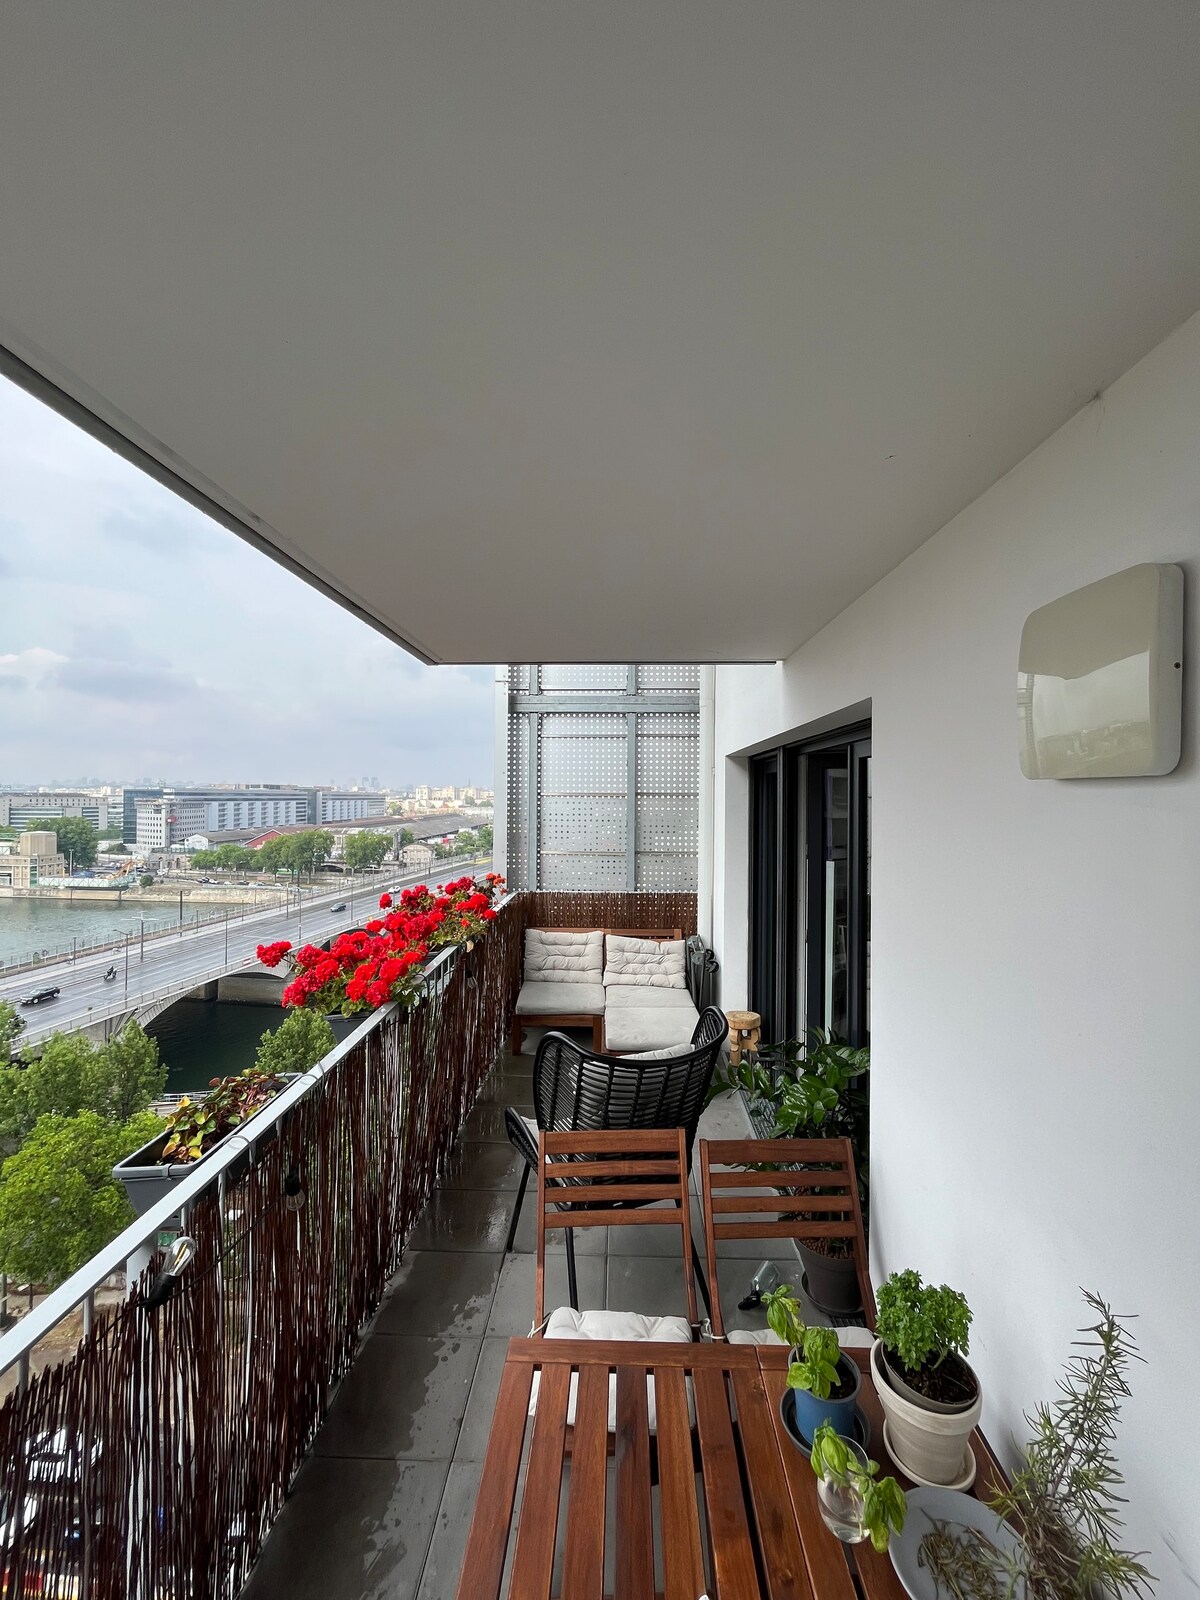 1-bedroom apartment with balcony view of the Seine